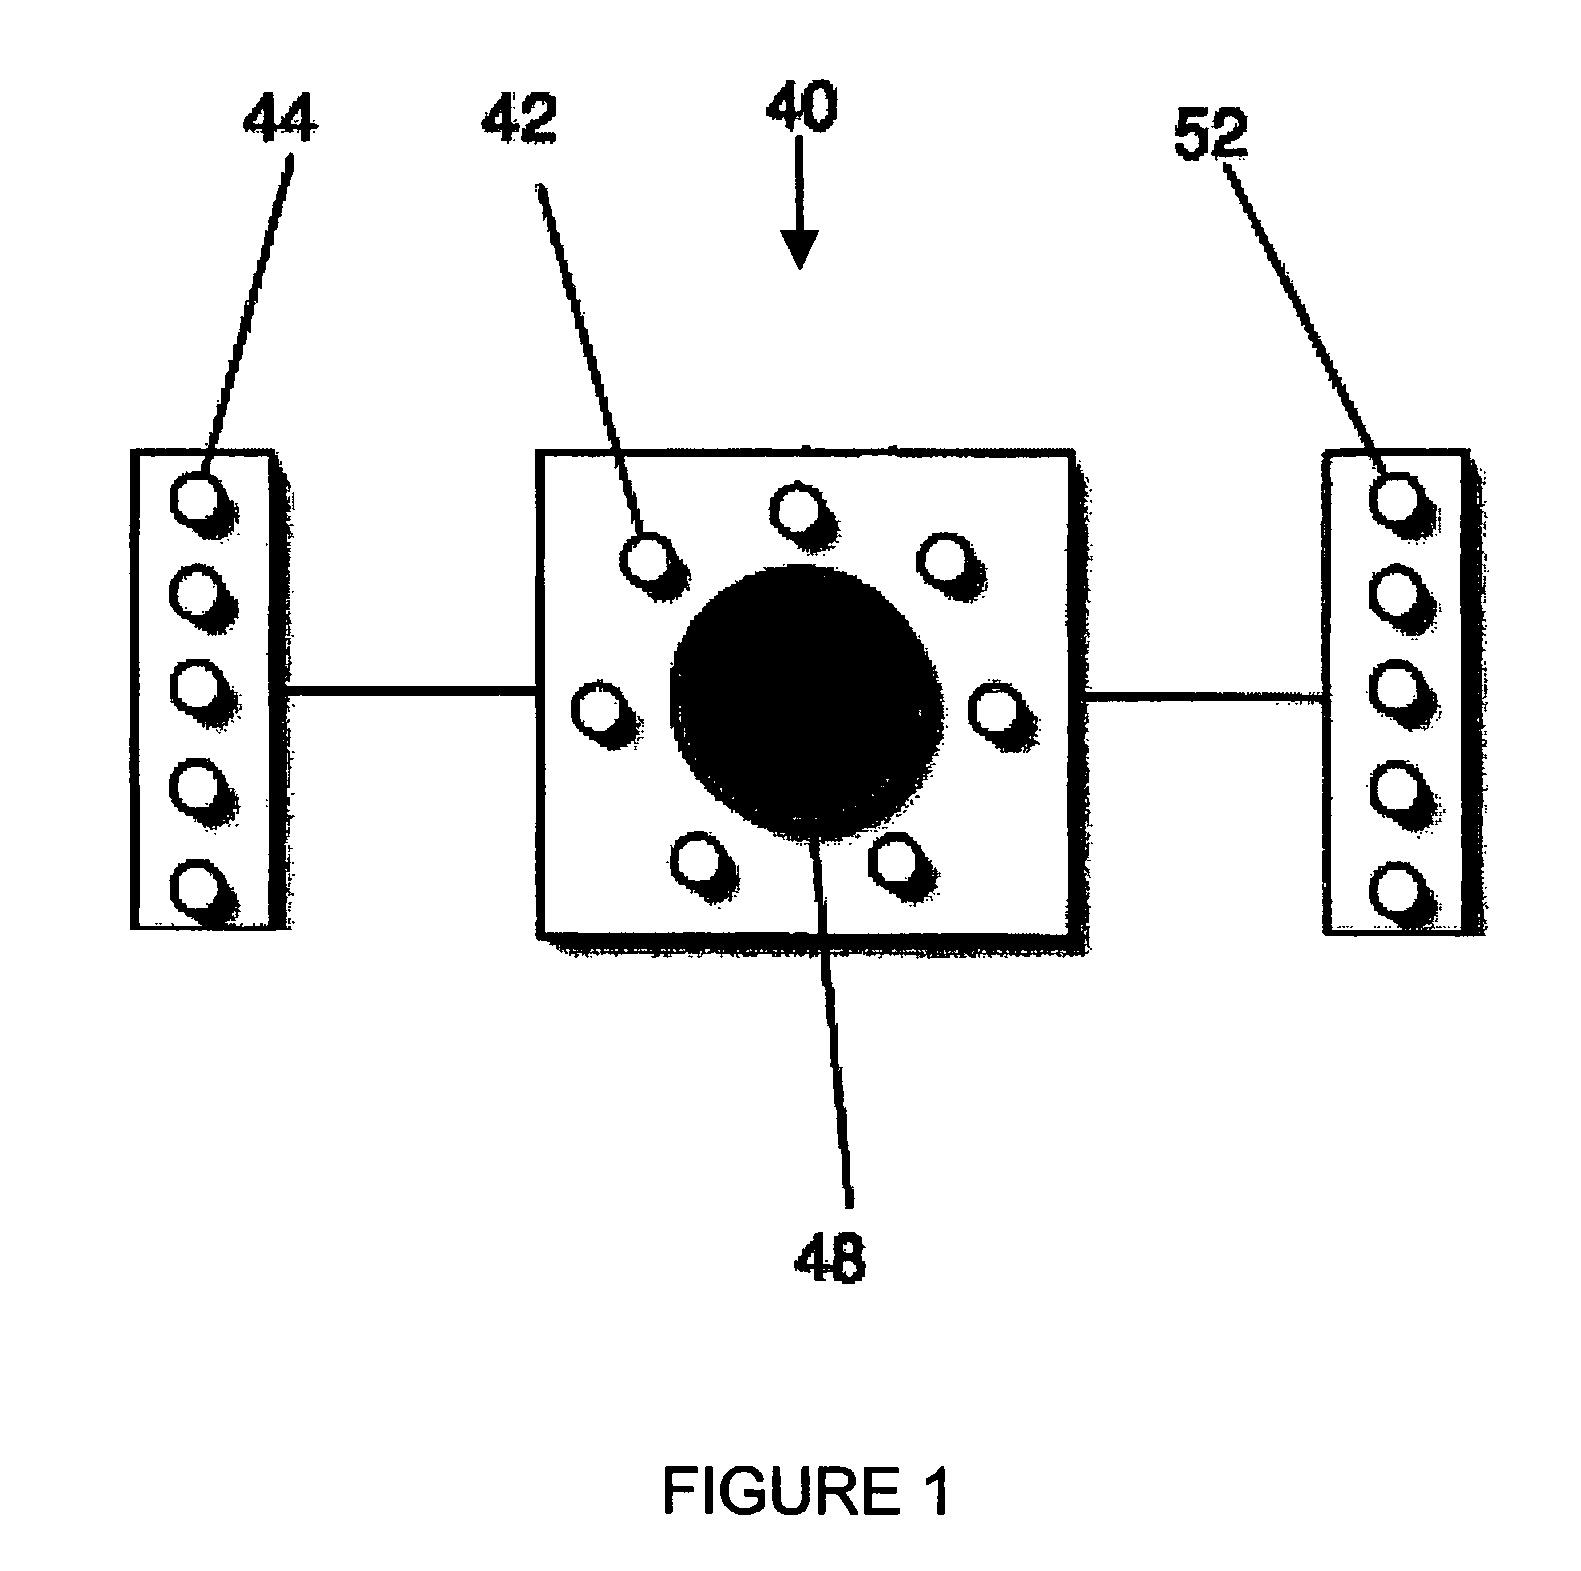 Method and apparatus for communication between humans and devices